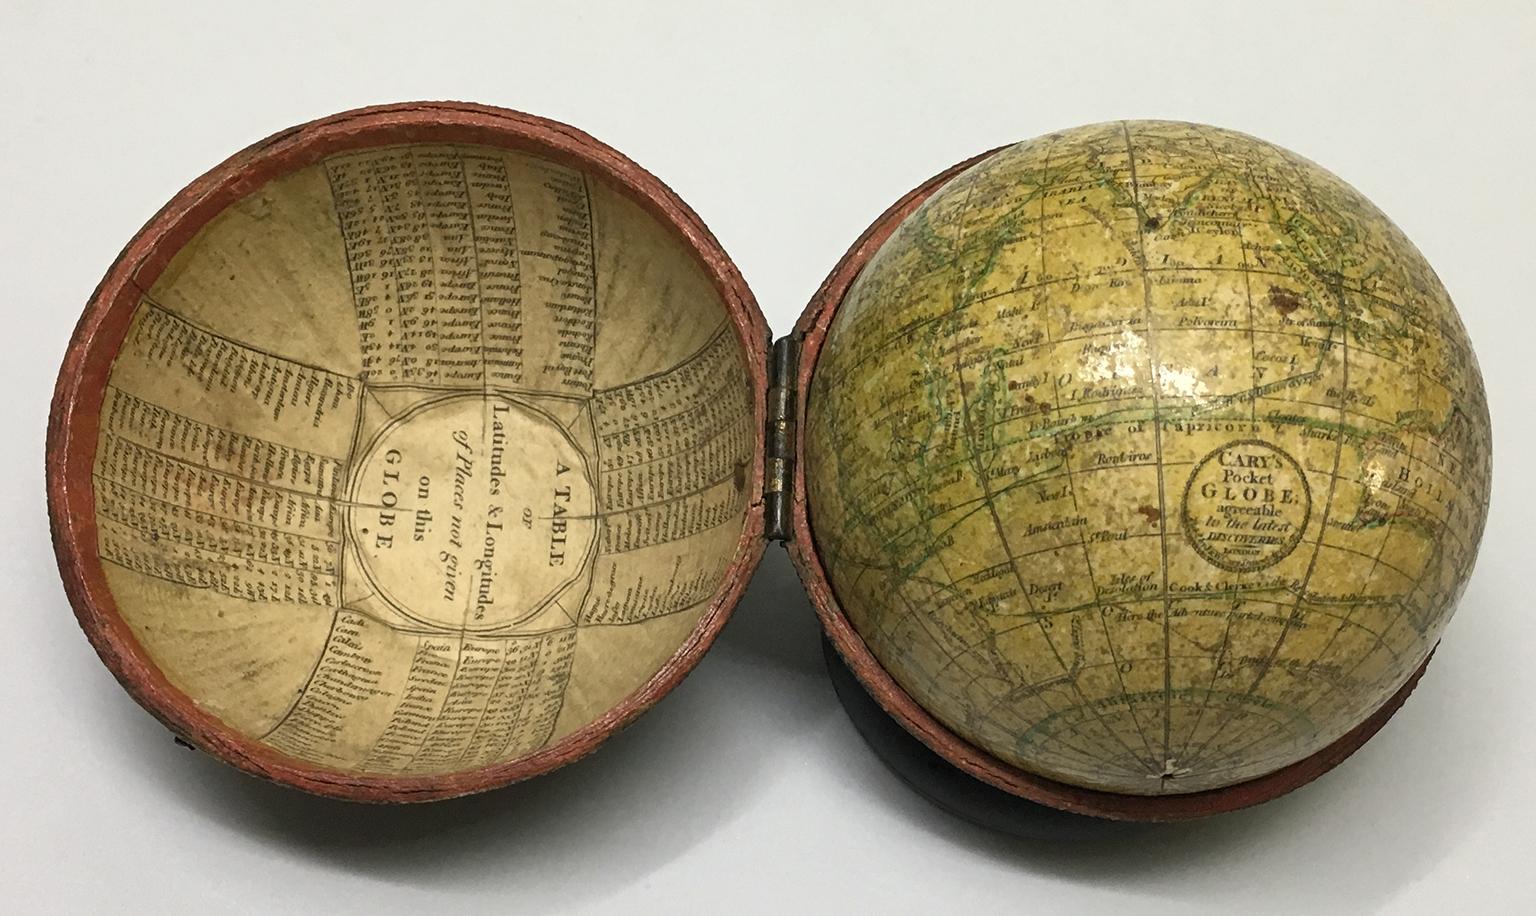 John and William Cary
Pocket globe
London, 1791

The pocket globe is contained in its original case, which itself is covered in shark skin.
There are various gaps in the original paint on the sphere. The case no longer closes.
It measures 3 in